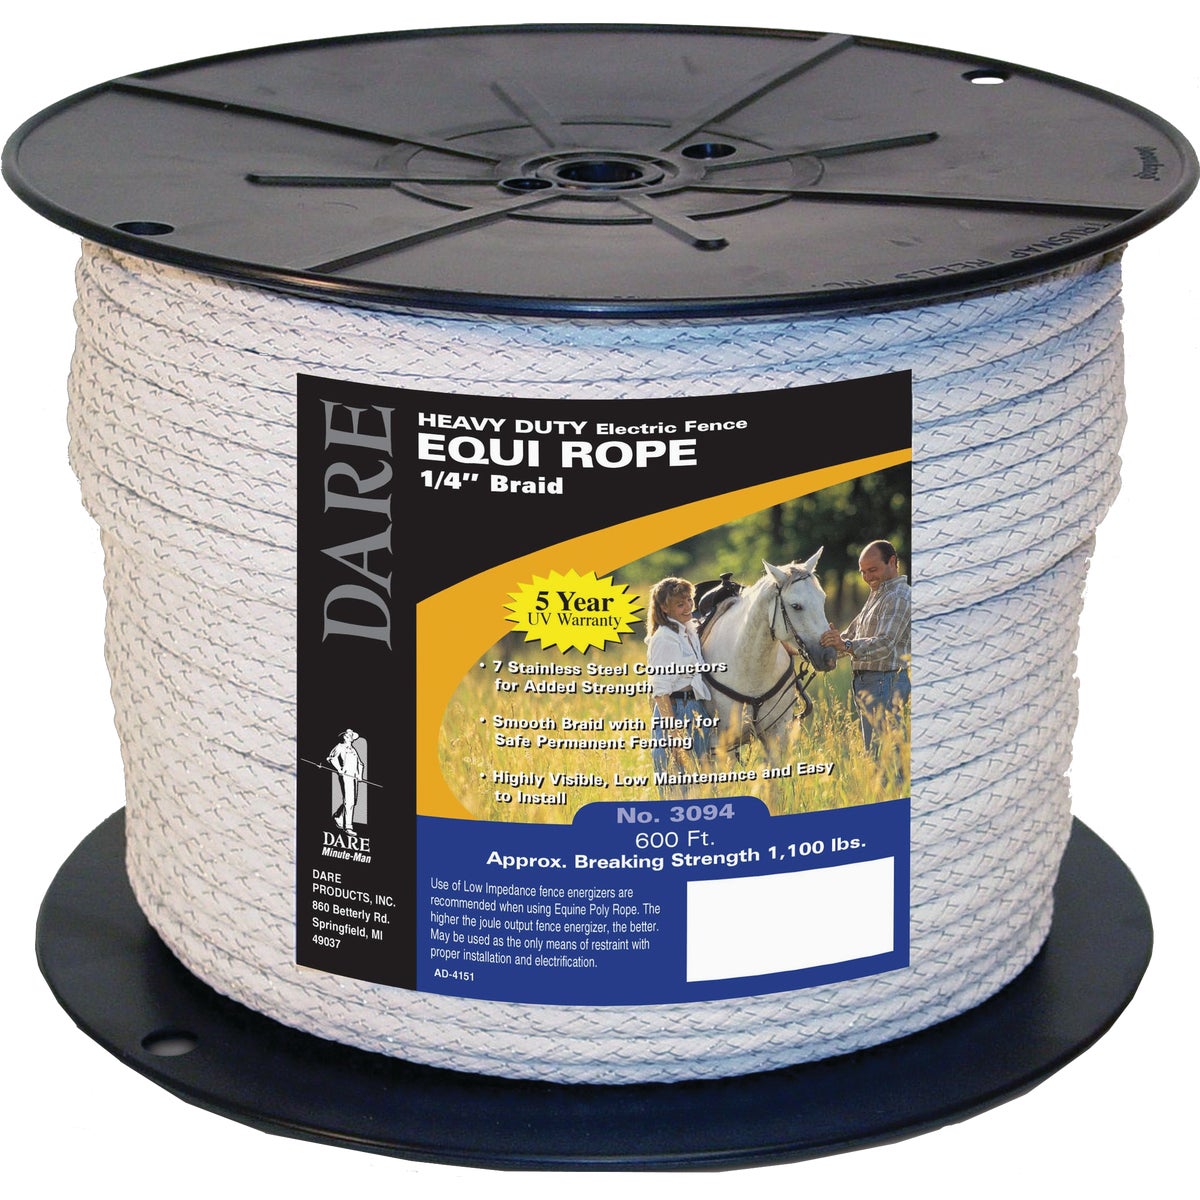 Item 747028, Poly equine rope.